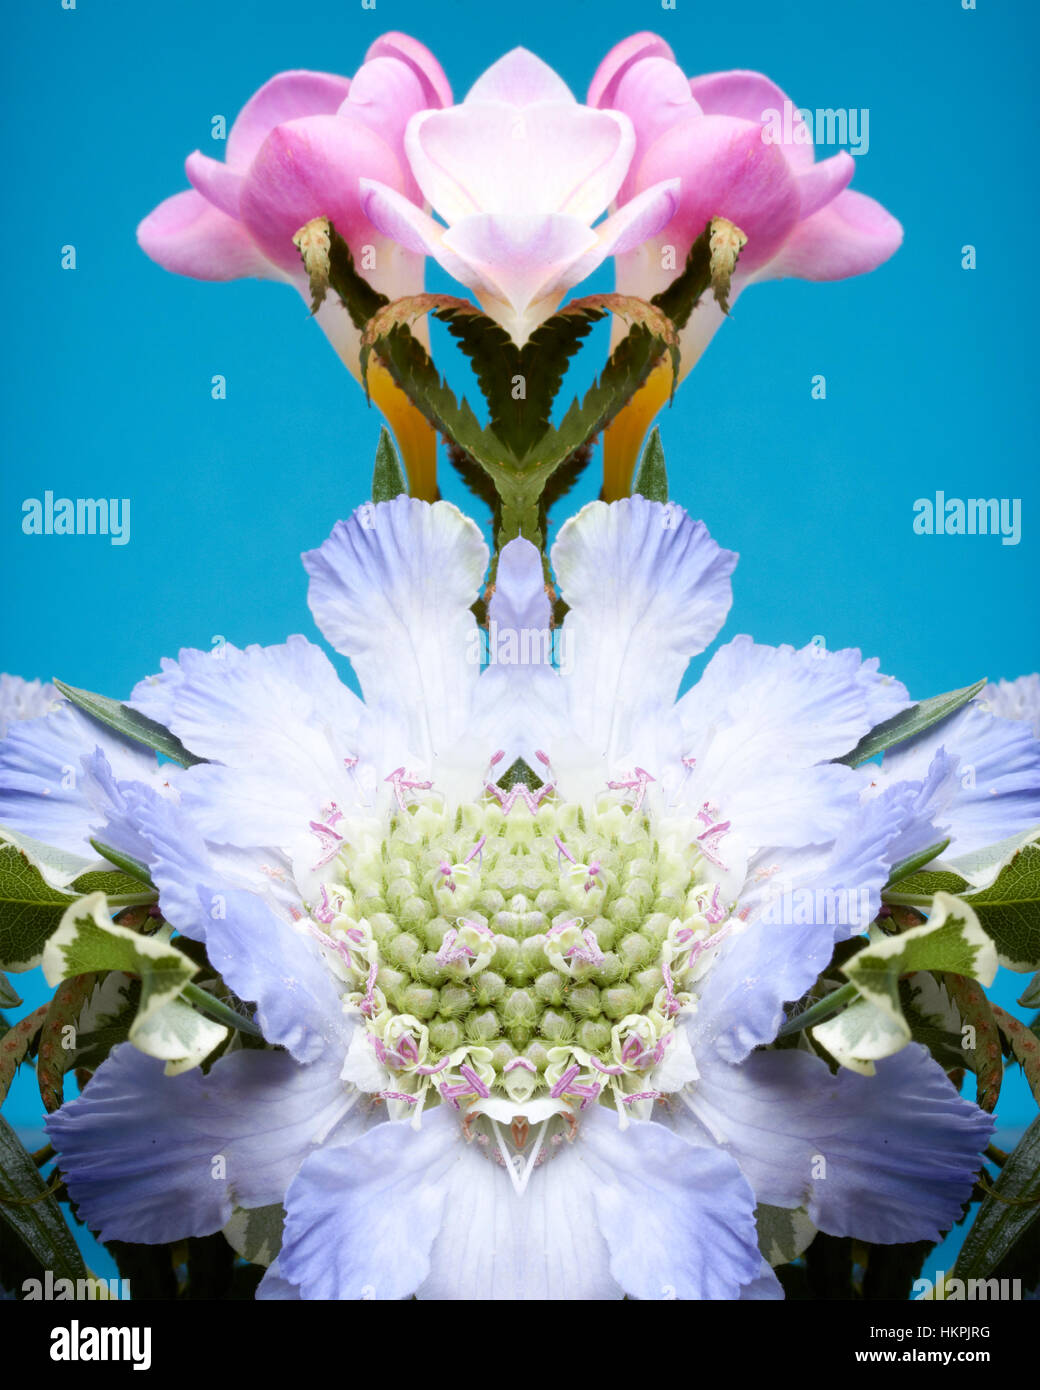 A symmetrical and reflected image of pink and purple flowers against a blue background Stock Photo